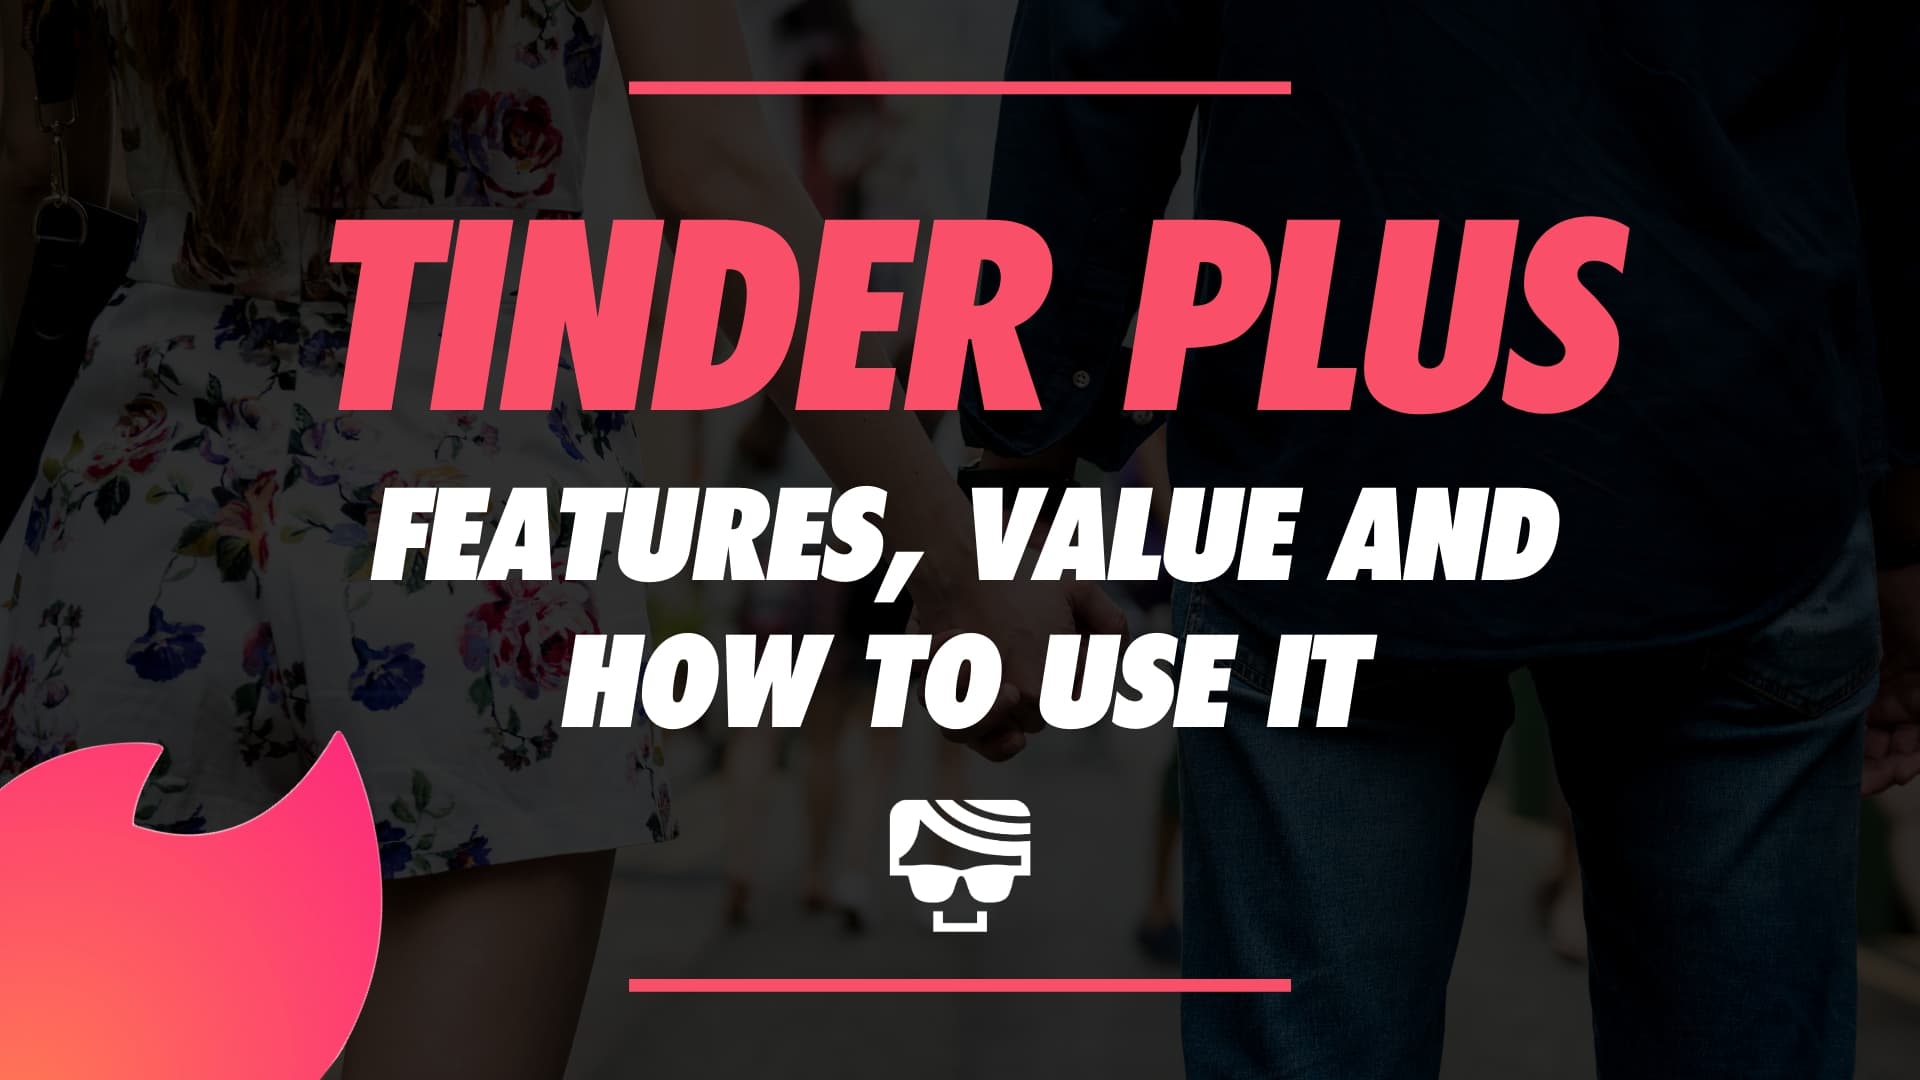 Is Tinder Plus Worth It? 2023 Tinder Plus Features Review